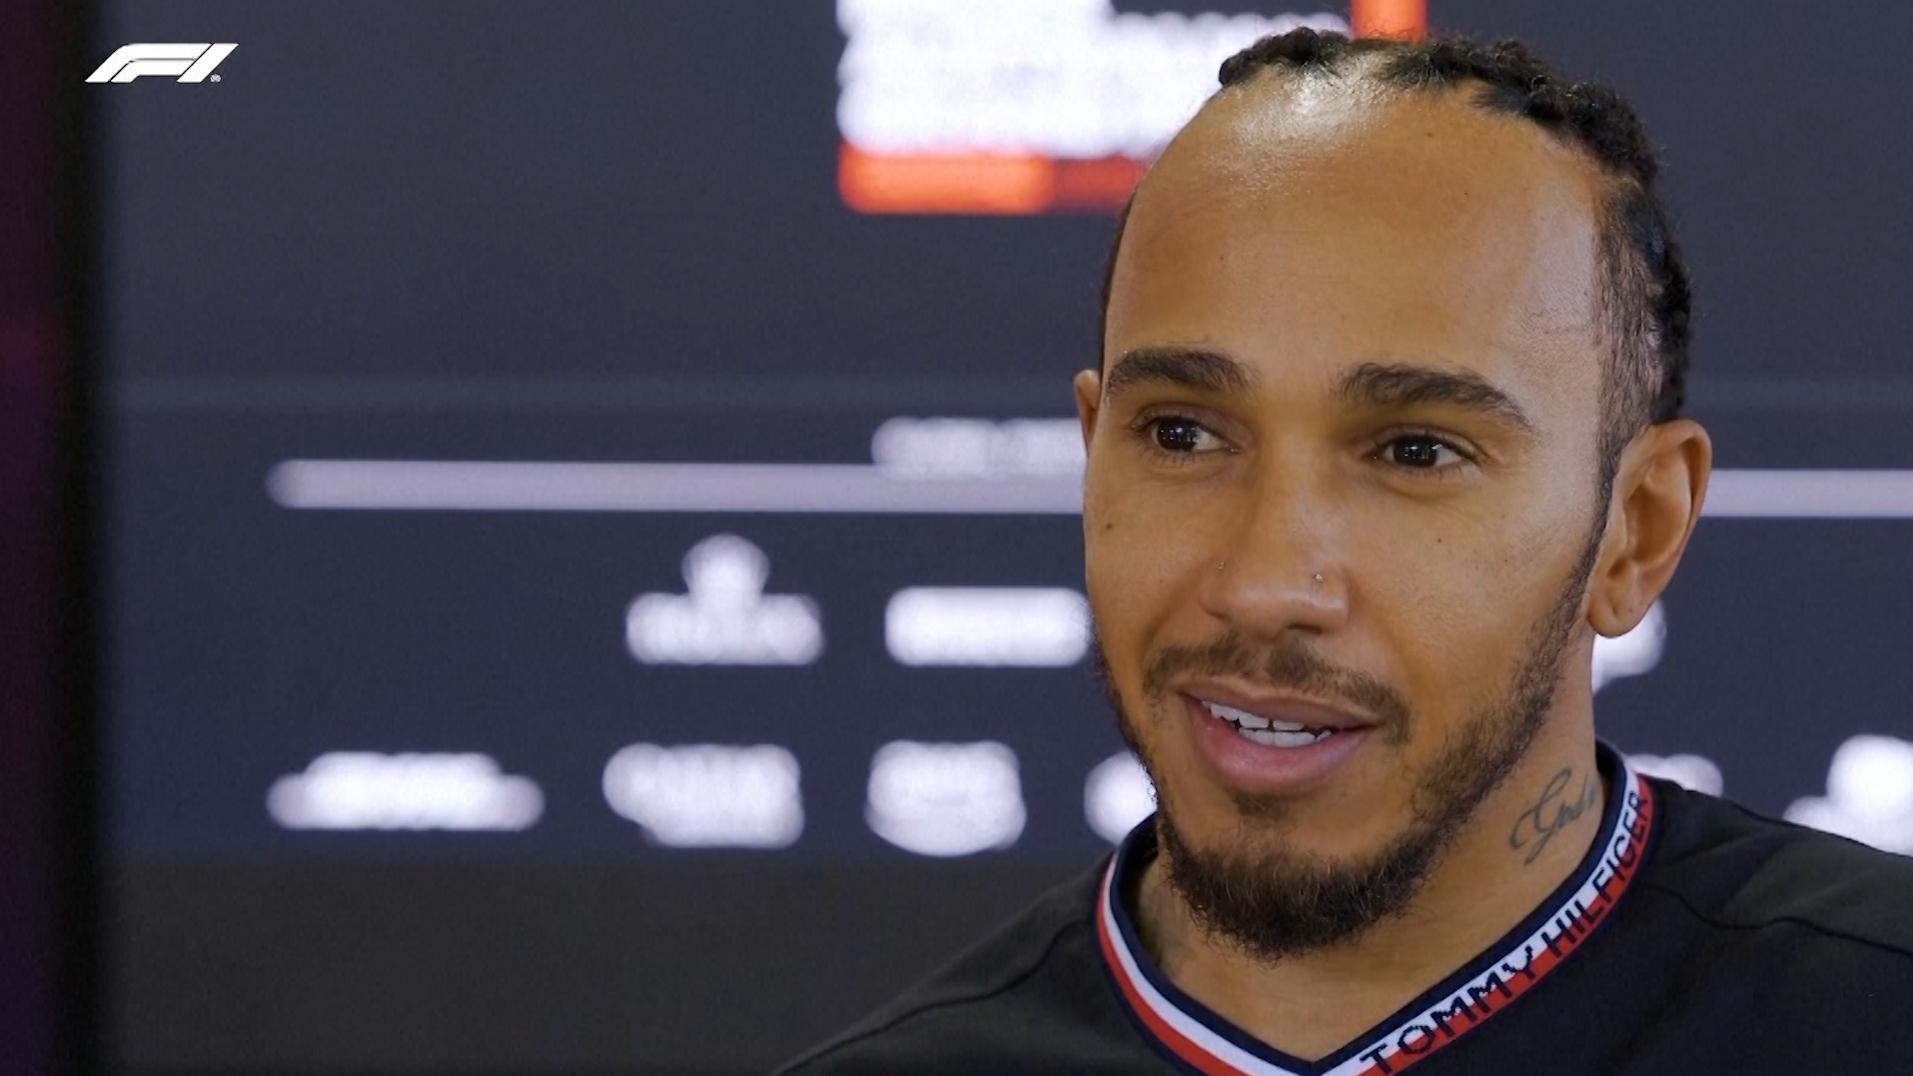 Hamilton: I'm used to getting knocked out at Q2